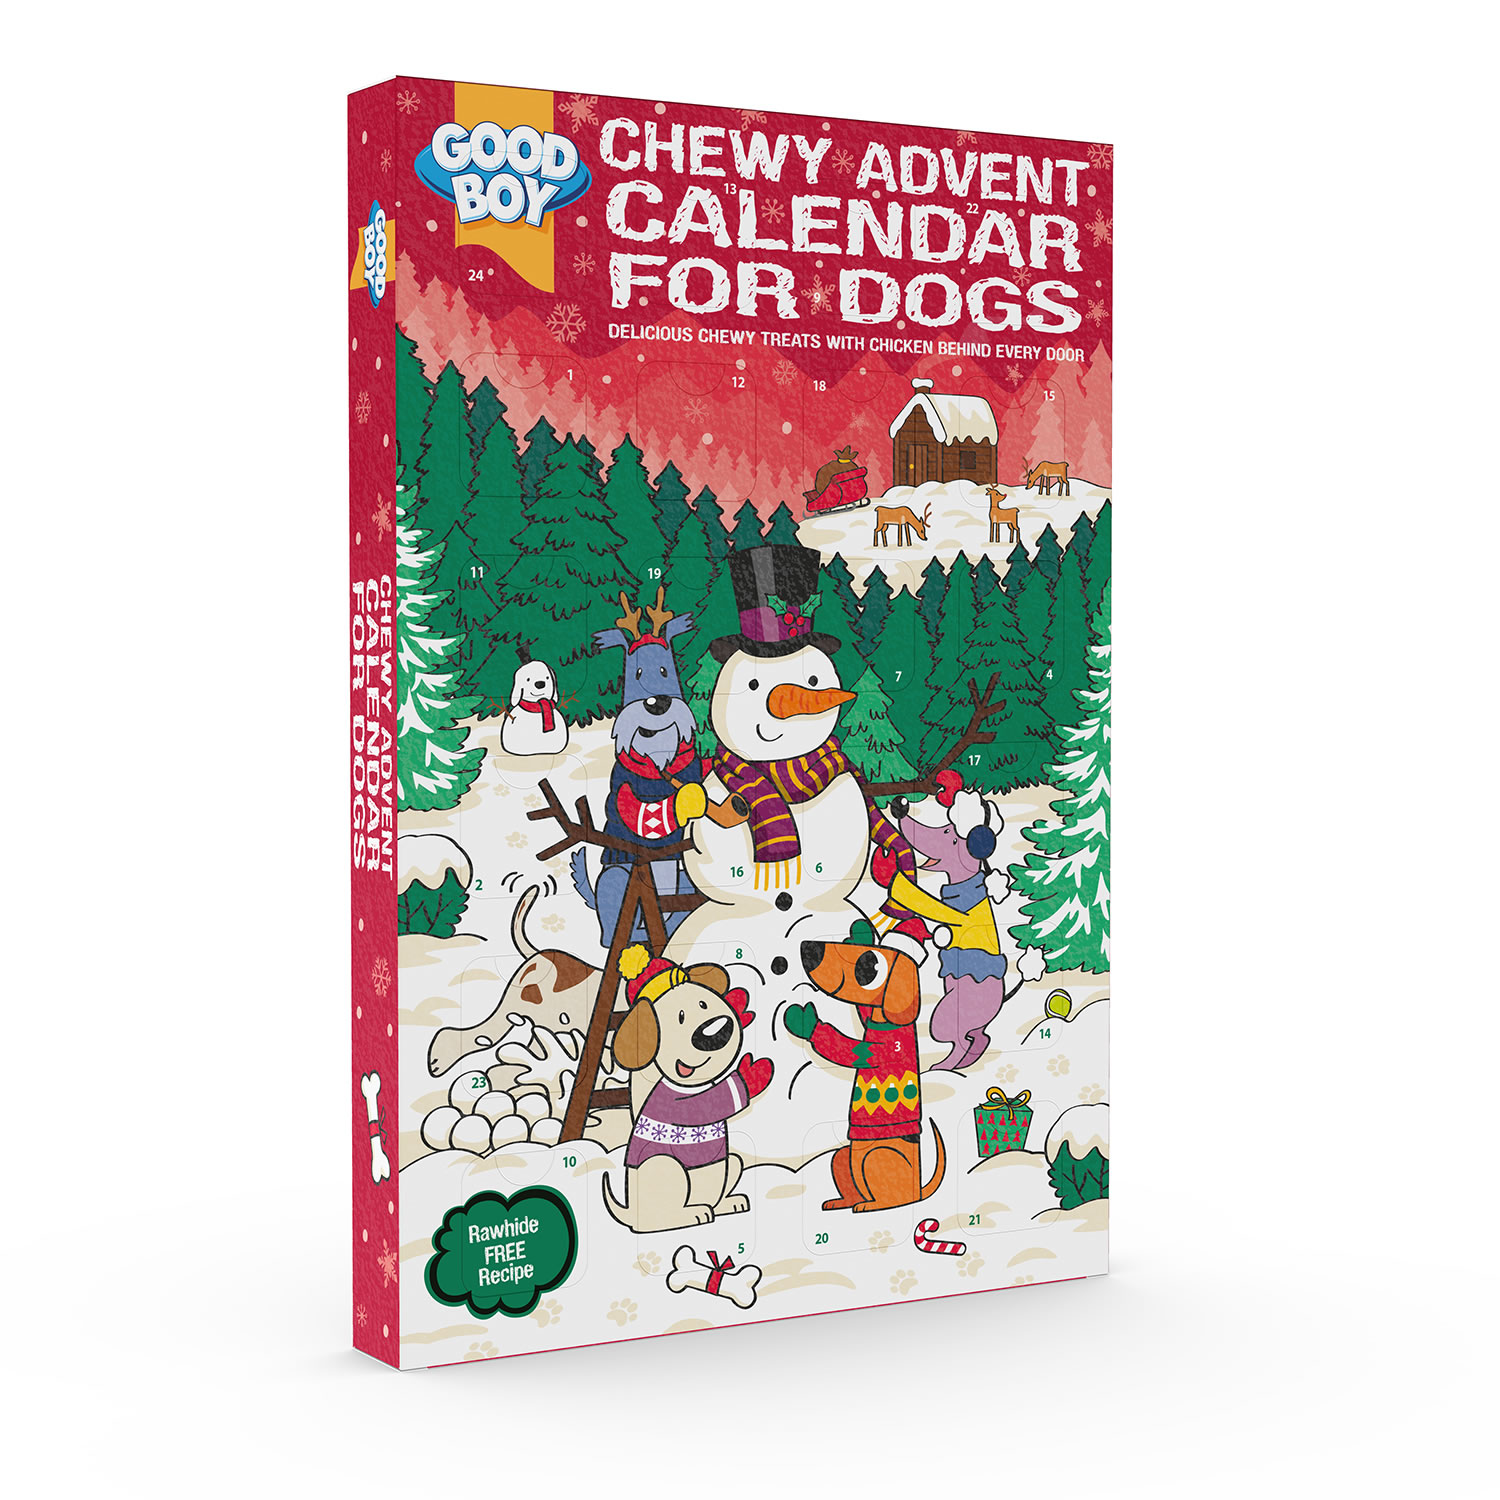 GOOD BOY CHEWY ADVENT CALENDAR FOR DOGS